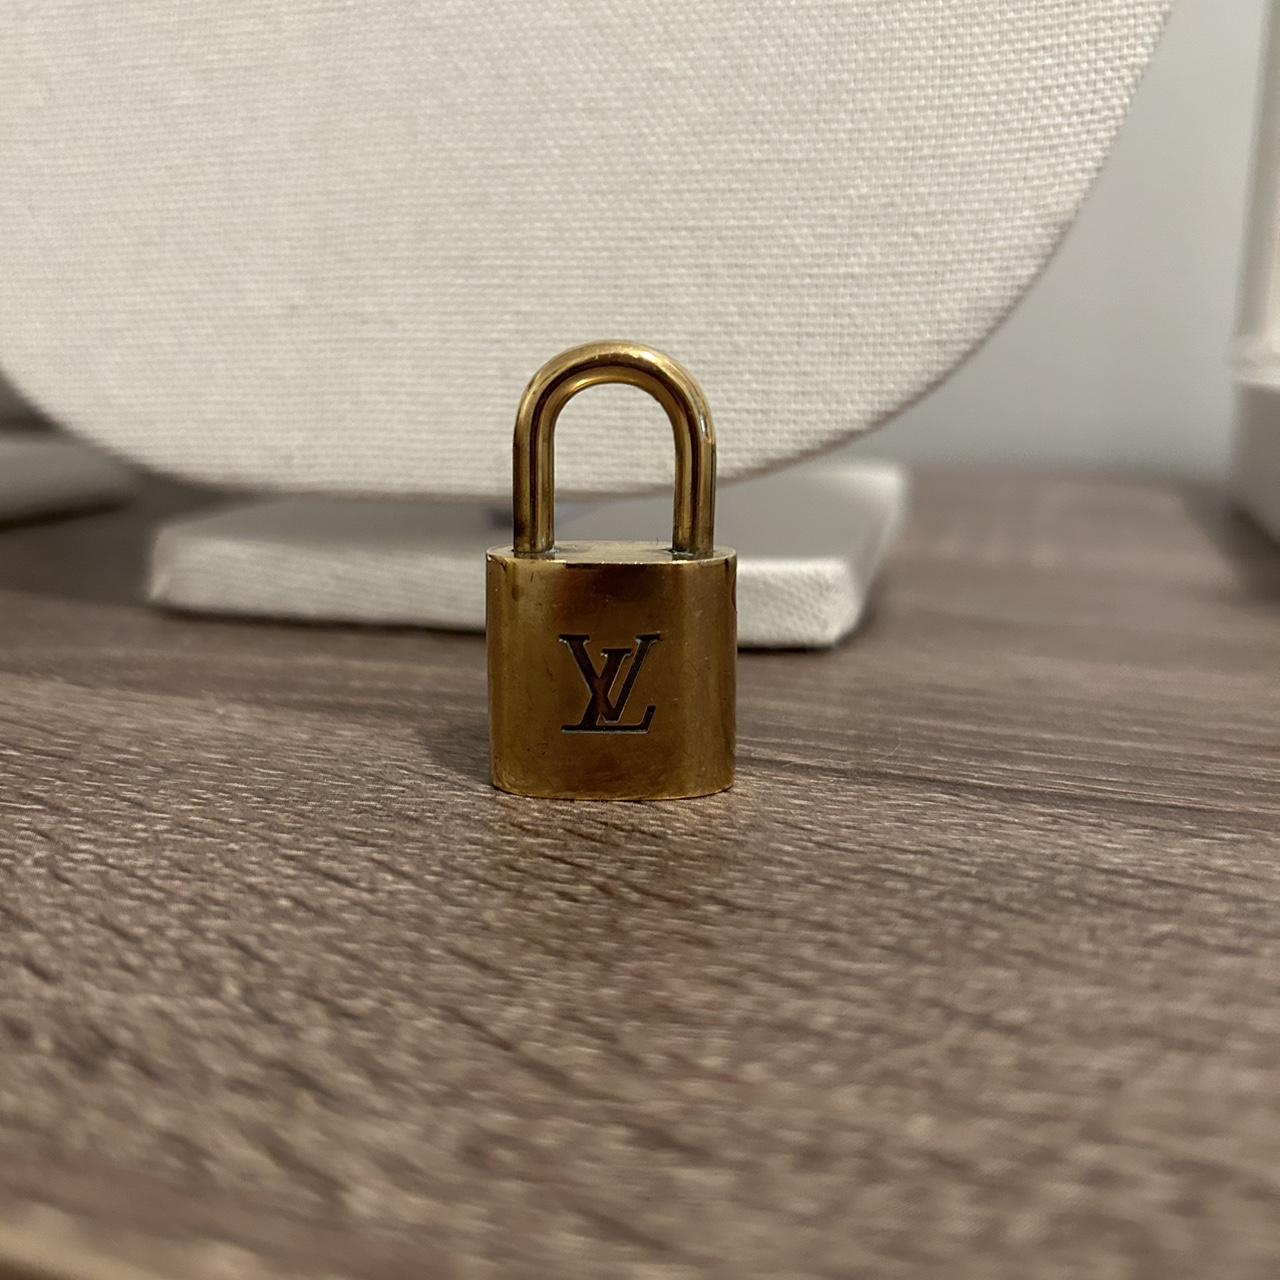 Authentic Louis Vuitton lock 🔒 If purchased I’ll... - Depop